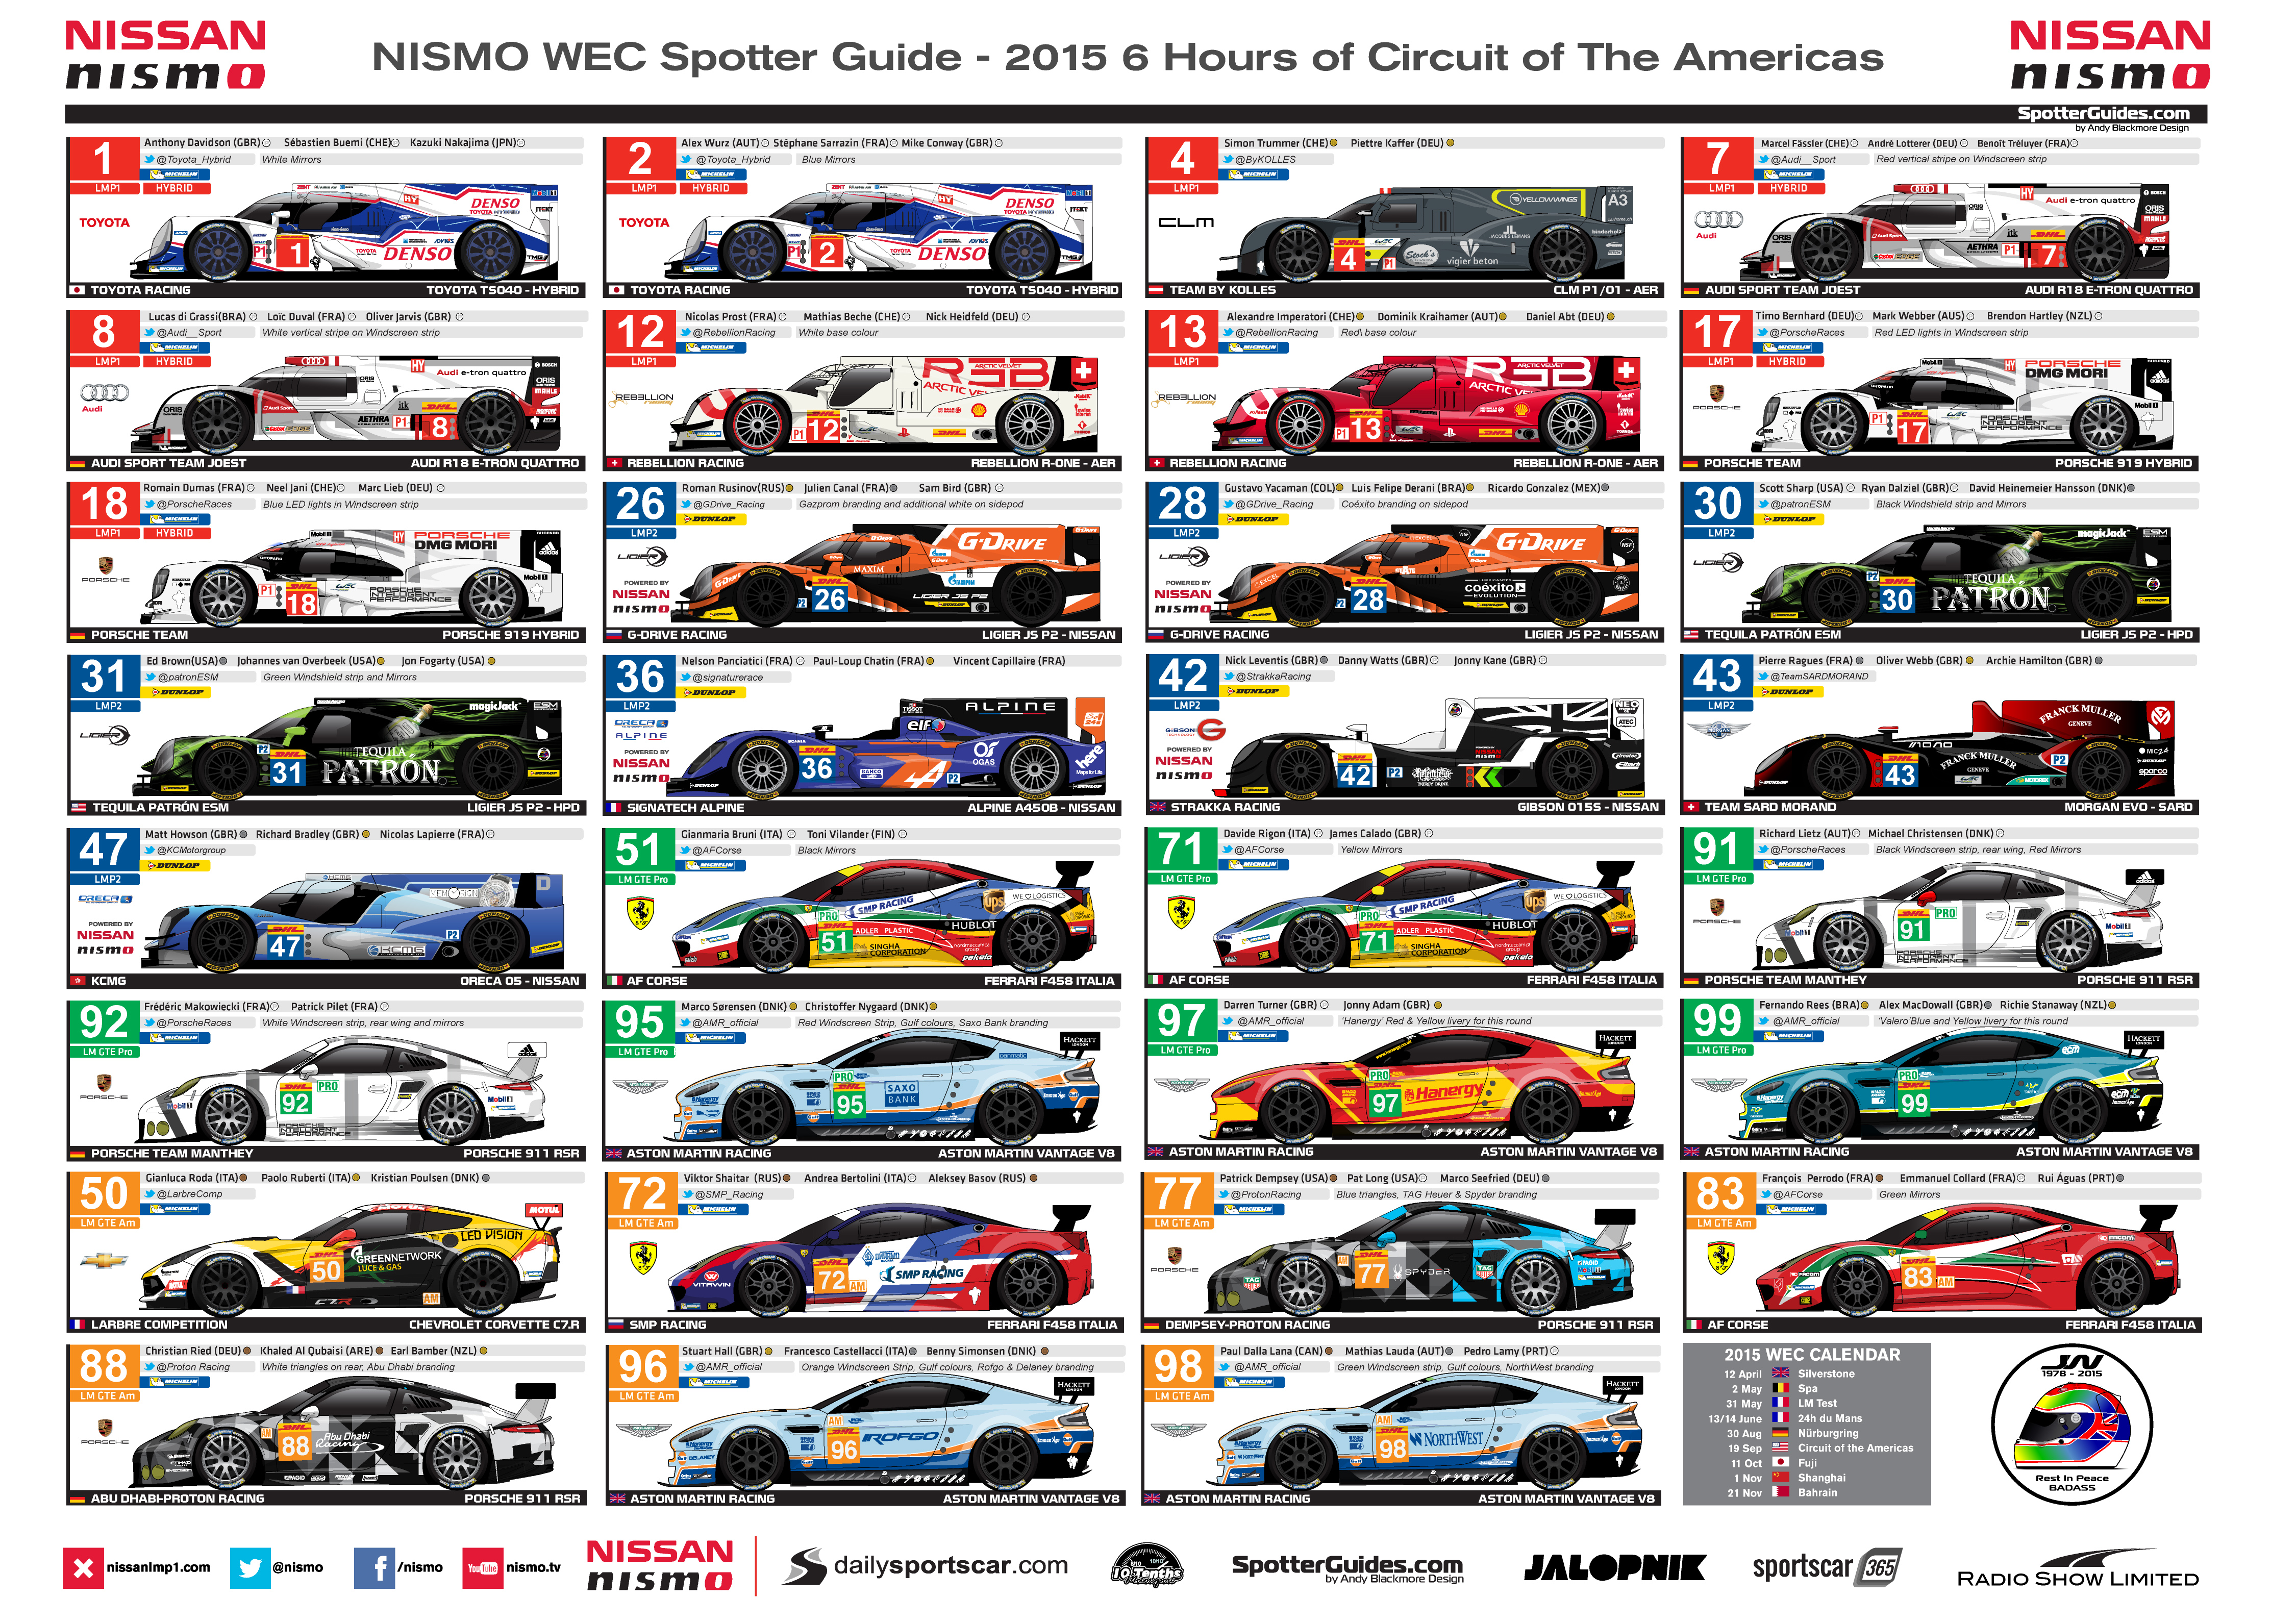 6 Hours of Circuit of The Americas